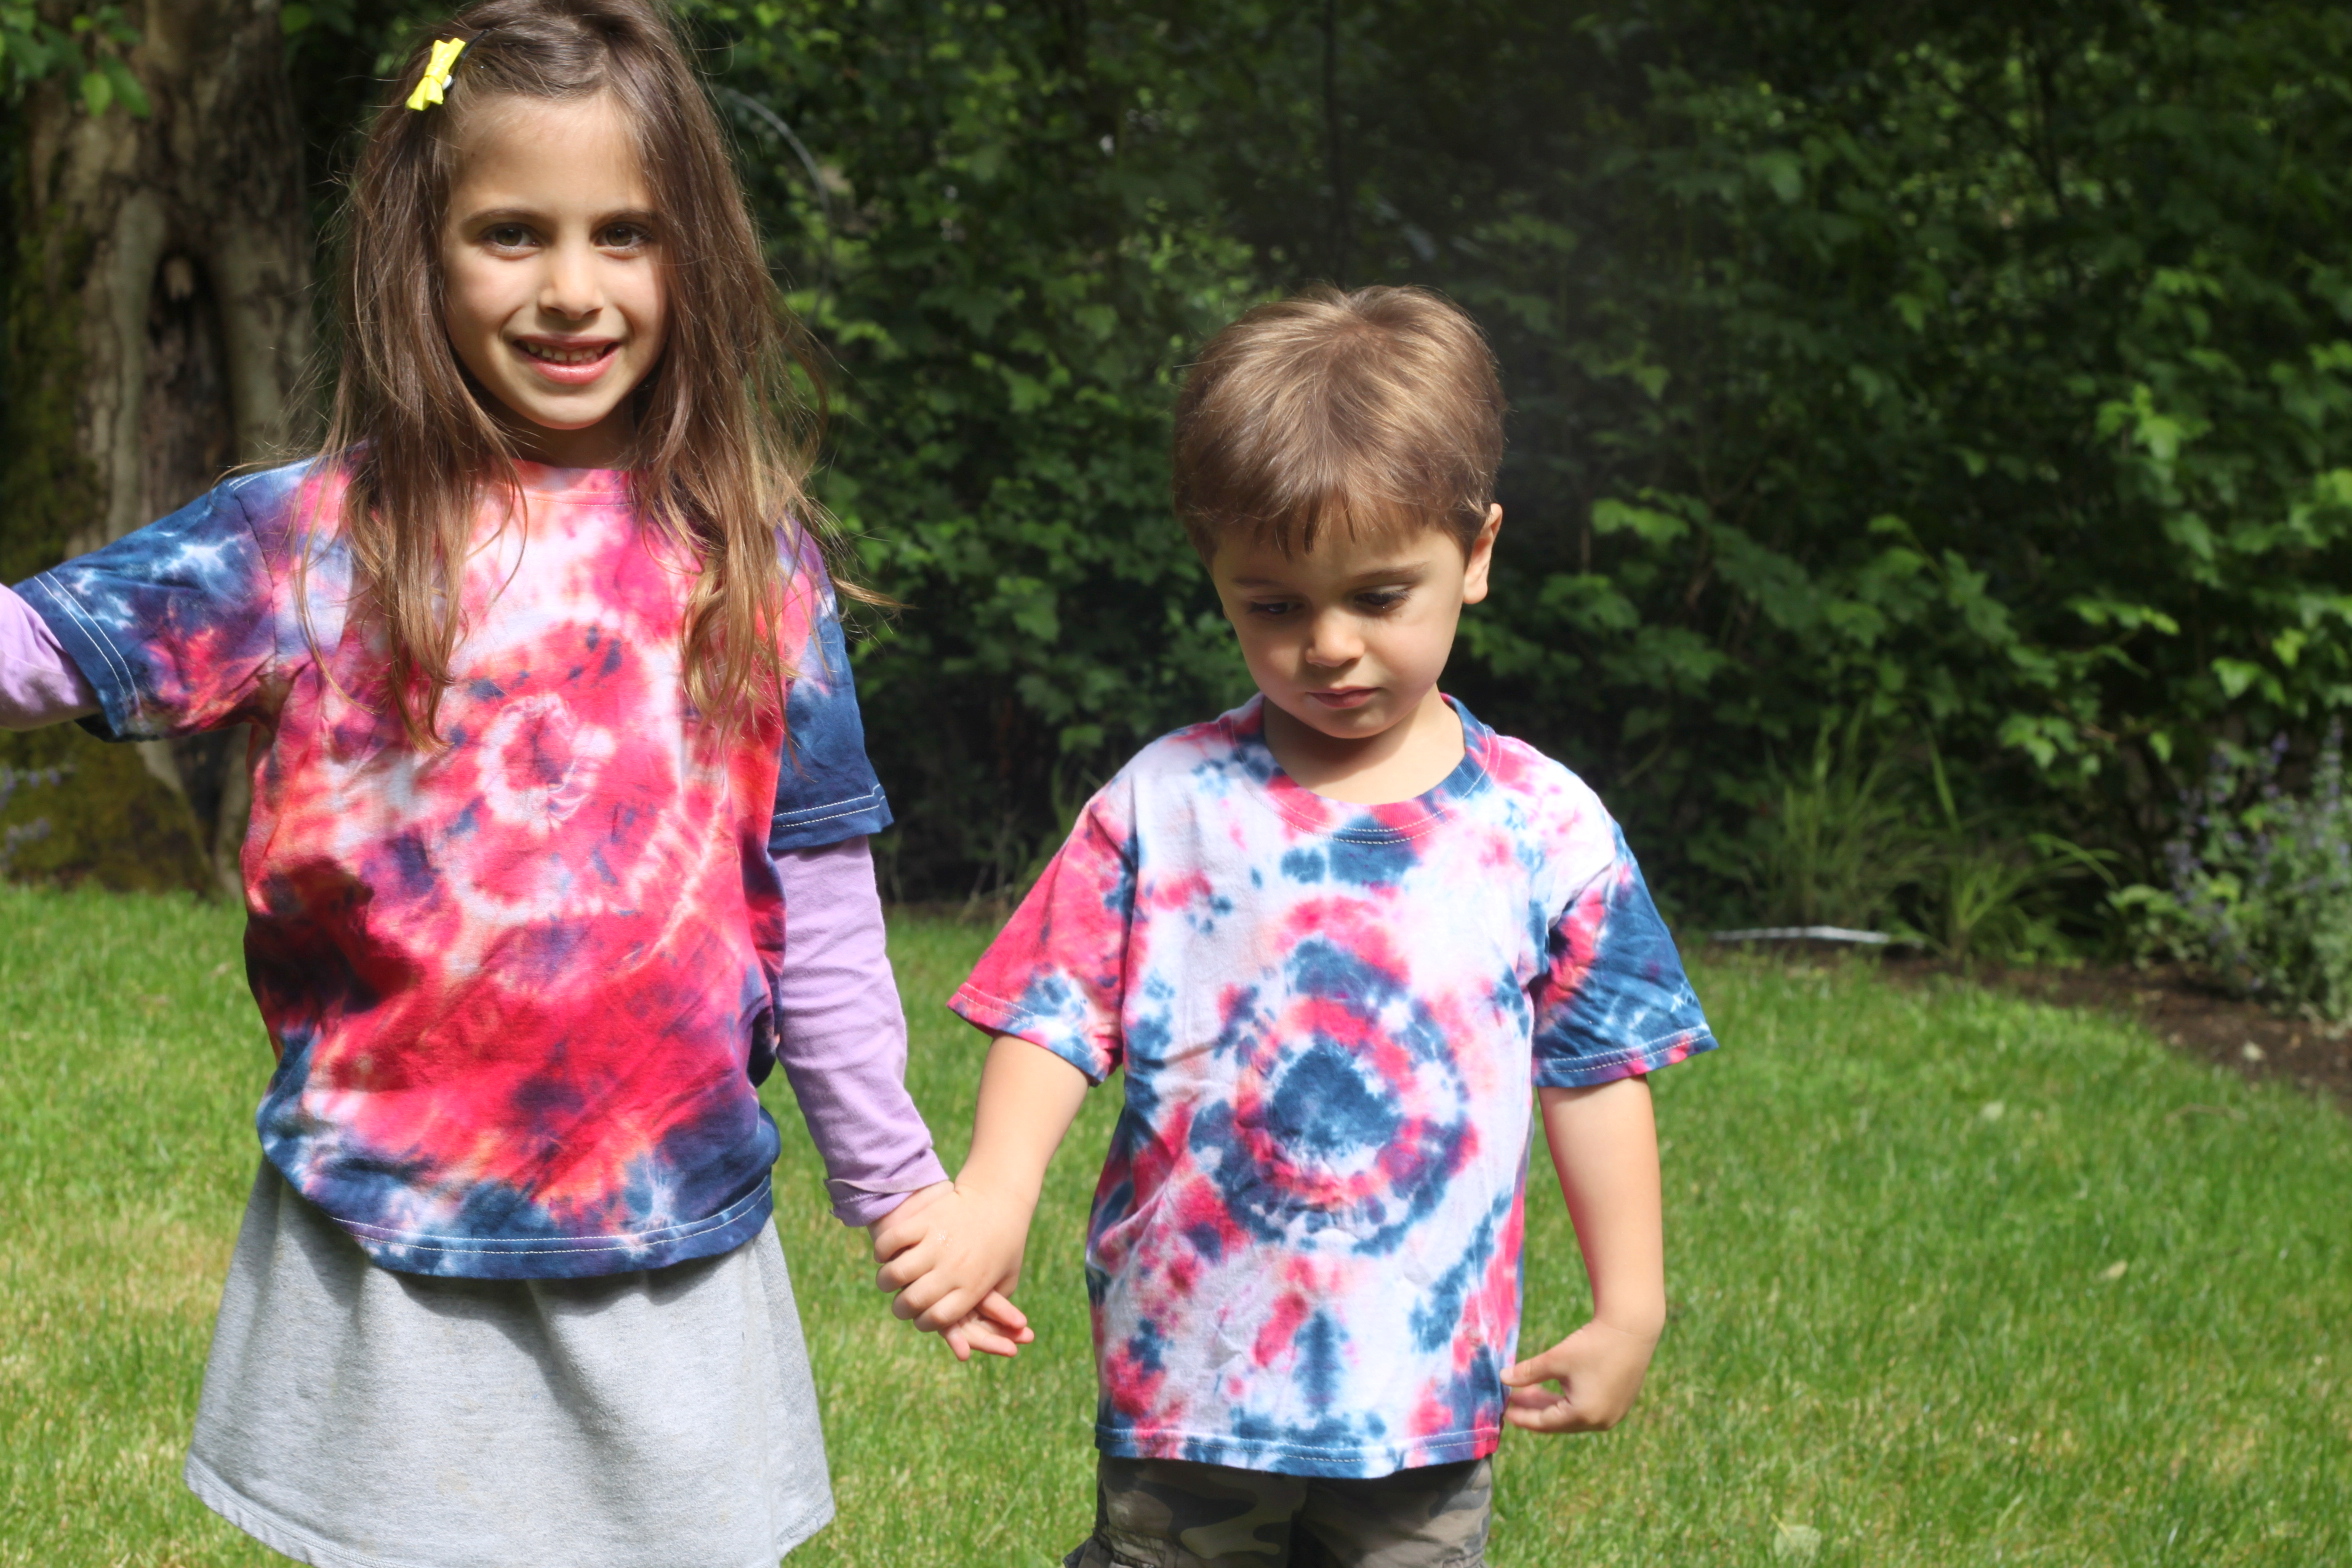 How to Make a Red, White and Blue Tie Dye Shirt! - Kids Activity Zone